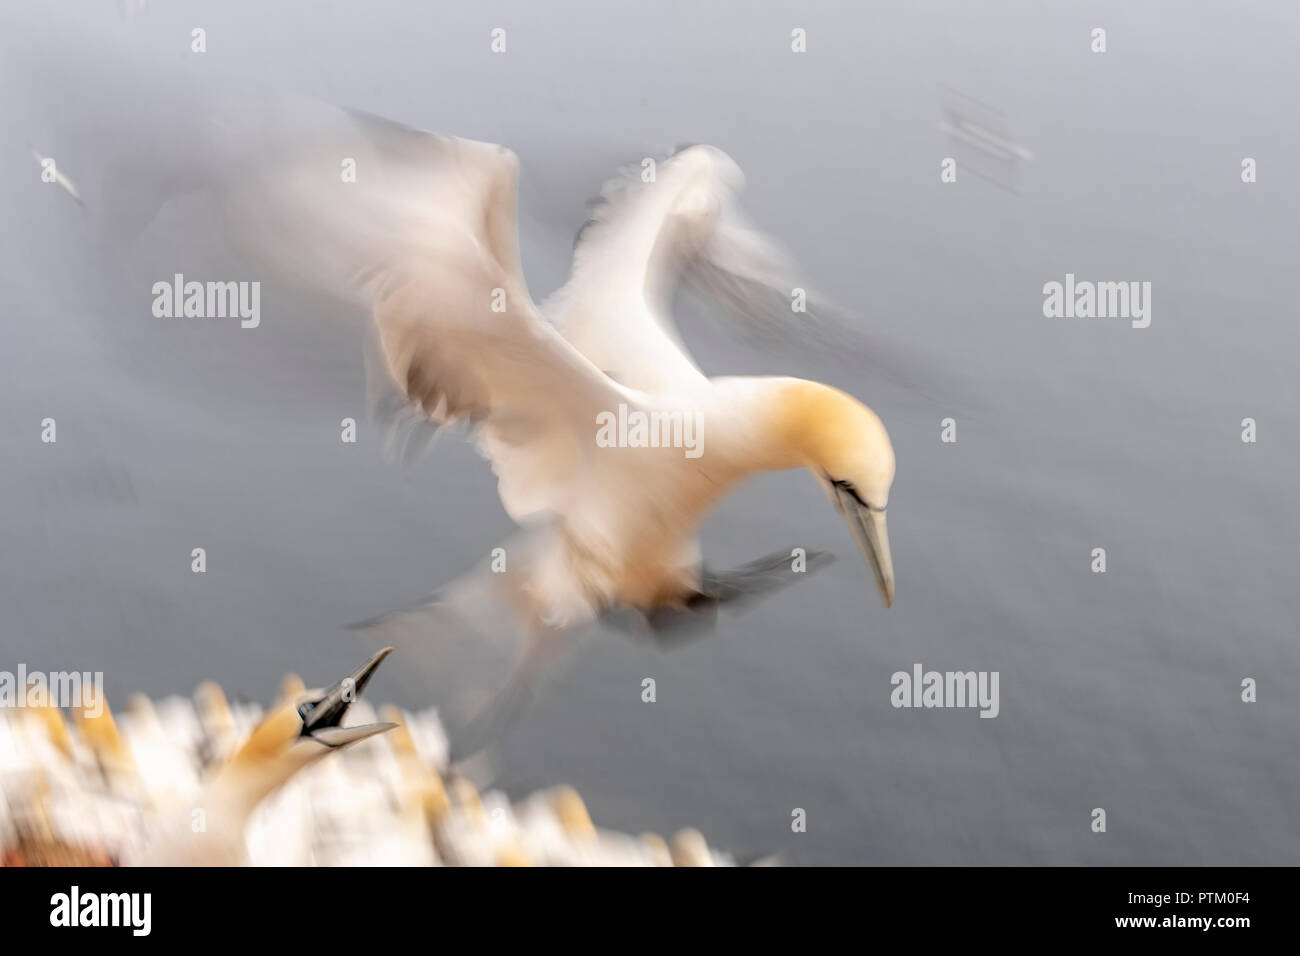 Northern gannet (Morus bassanus) on approach, colony at hatchery, welcome, Heligoland, Schleswig-Holstein, Germany Stock Photo